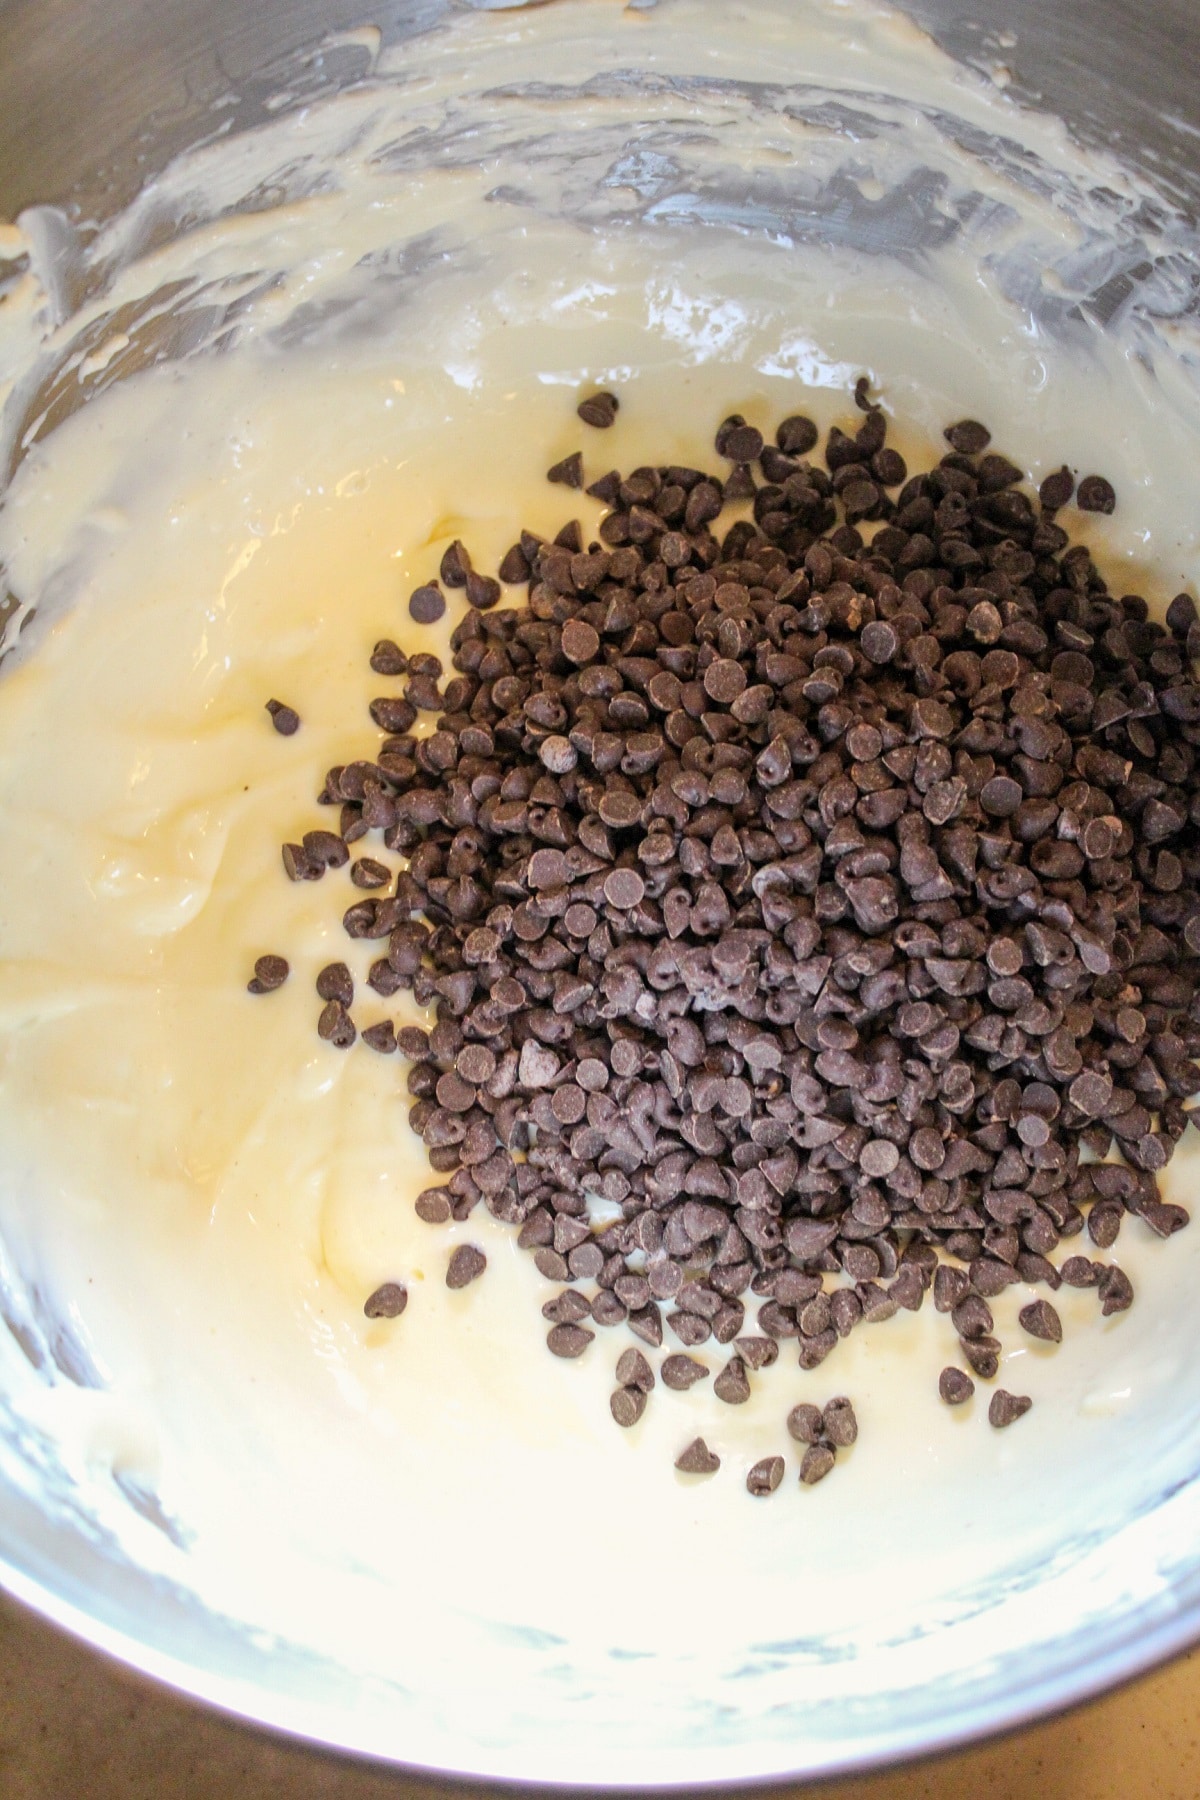 cheesecake batter with chocolate chips